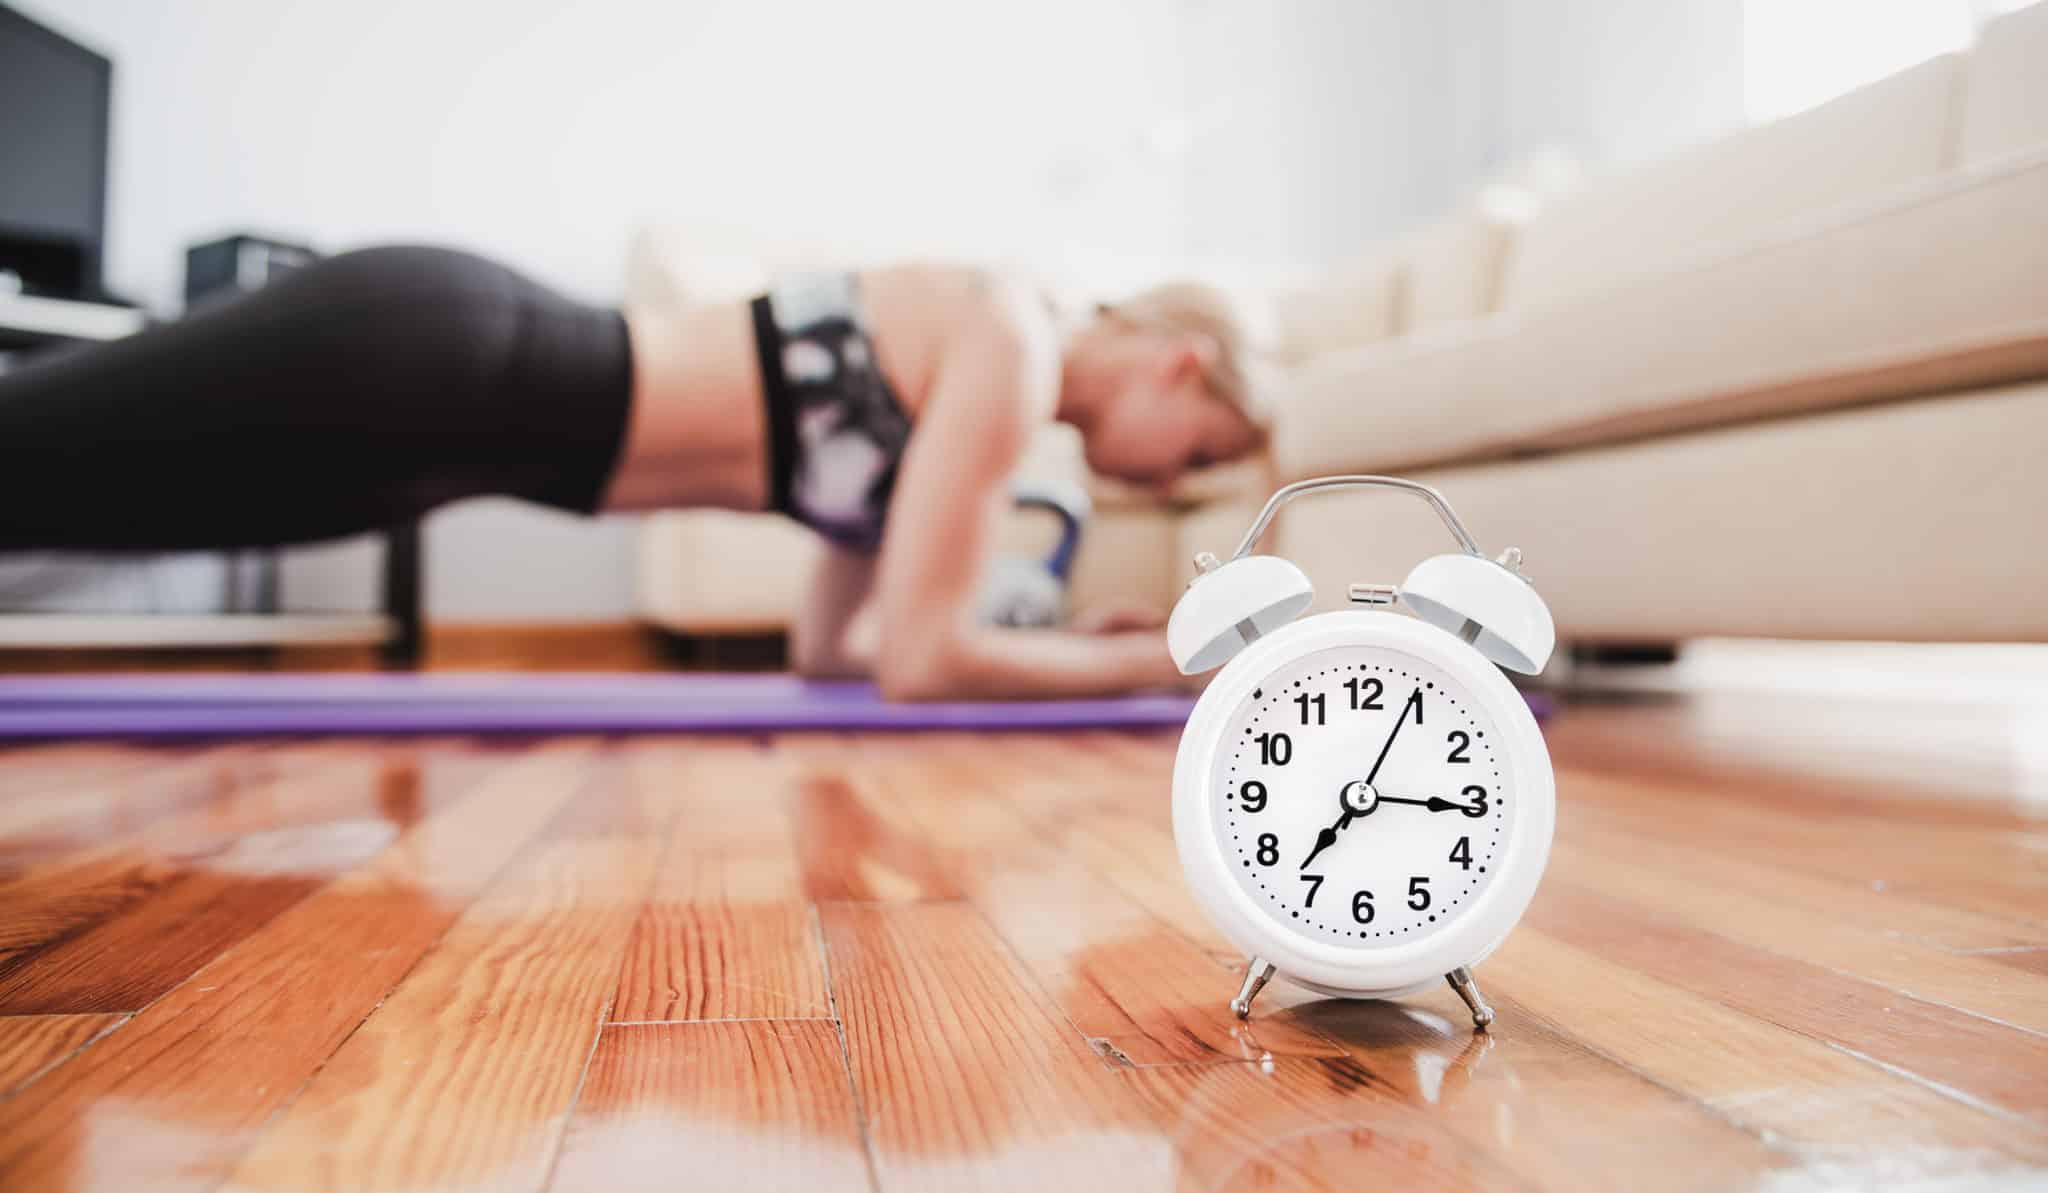 Young woman holding a plank on forearms in living room with clock timer in front